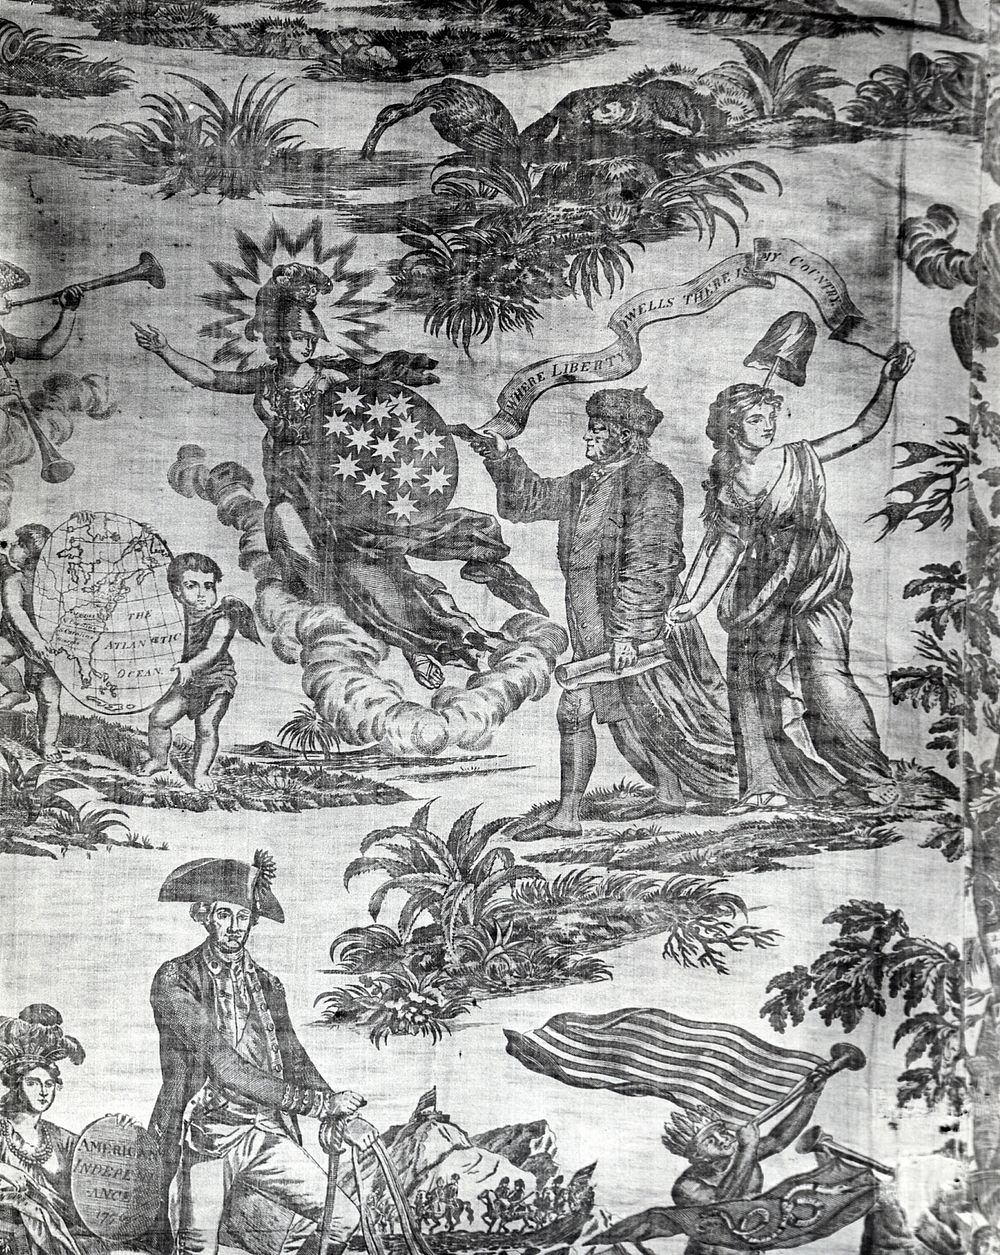 Apotheosis of Franklin (Furnishing Fabric) by Valentine Green (Engraver)